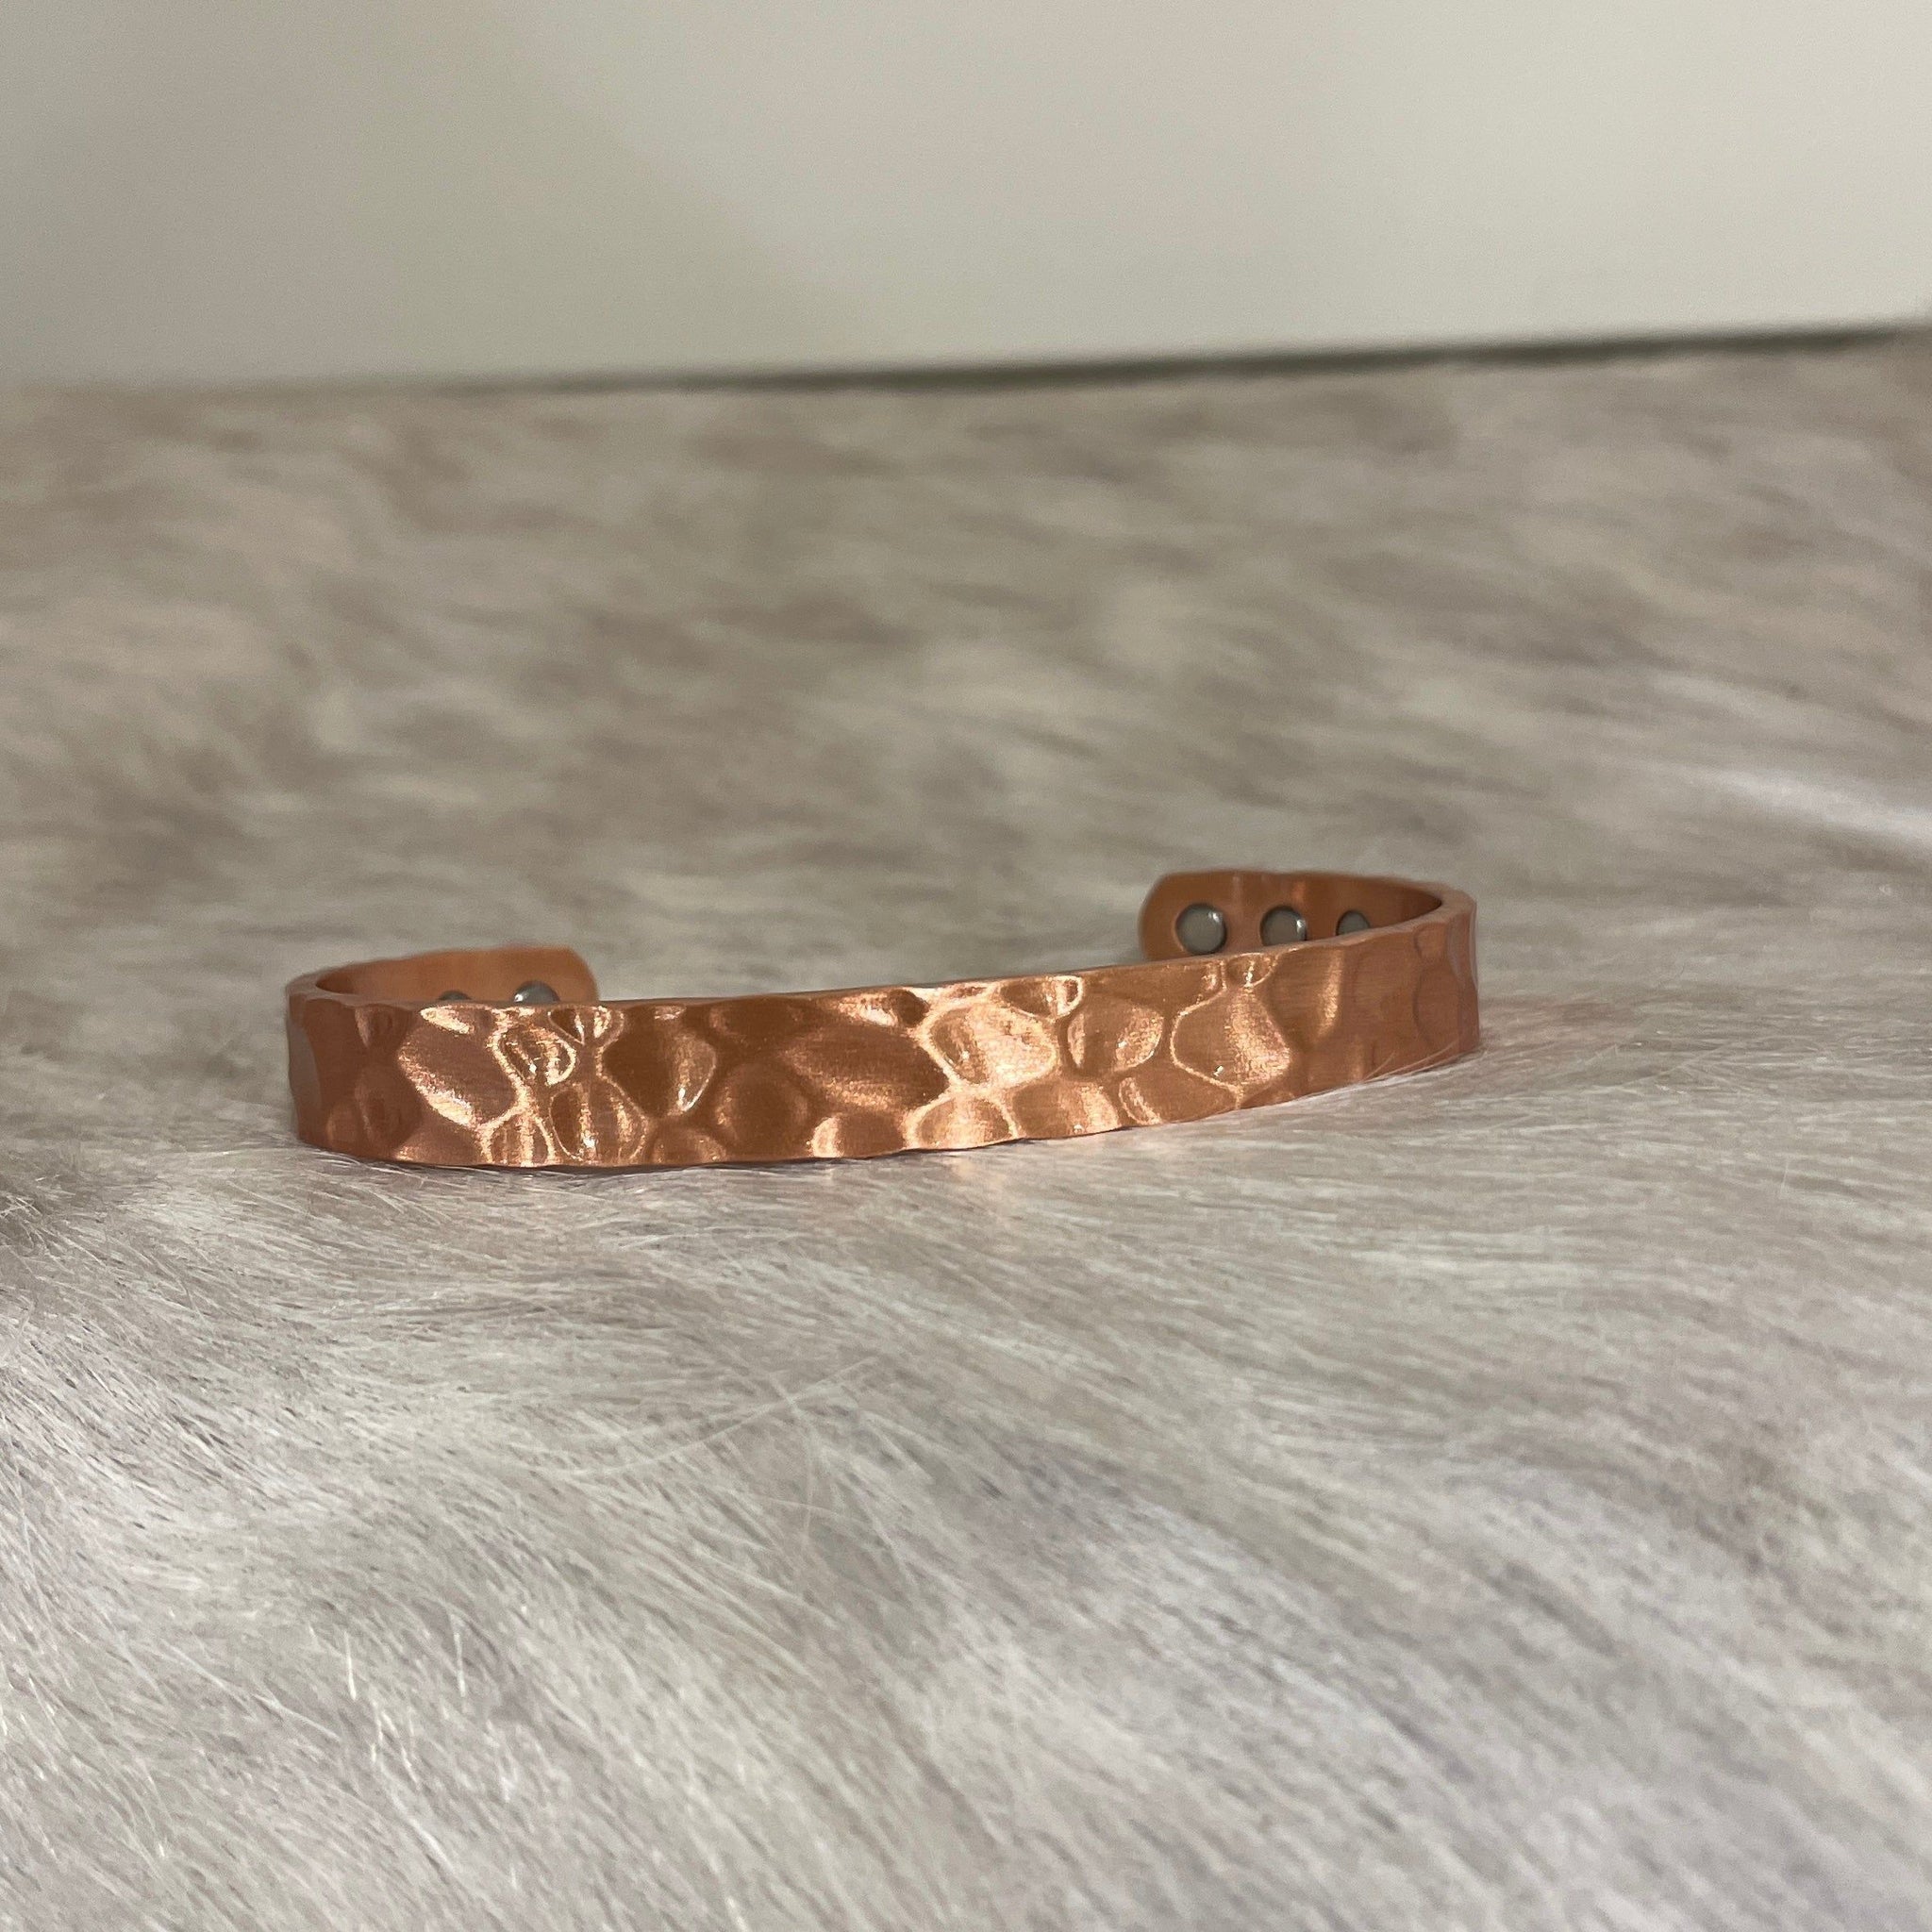 MAGNATURAL Pure Copper Magnetic Bracelet, Elegant, Copper Bangle with 6  Powerful Magnets Cuff Wrist Band for Women or Mens + Velvet Gift Pouch :  Amazon.co.uk: Health & Personal Care